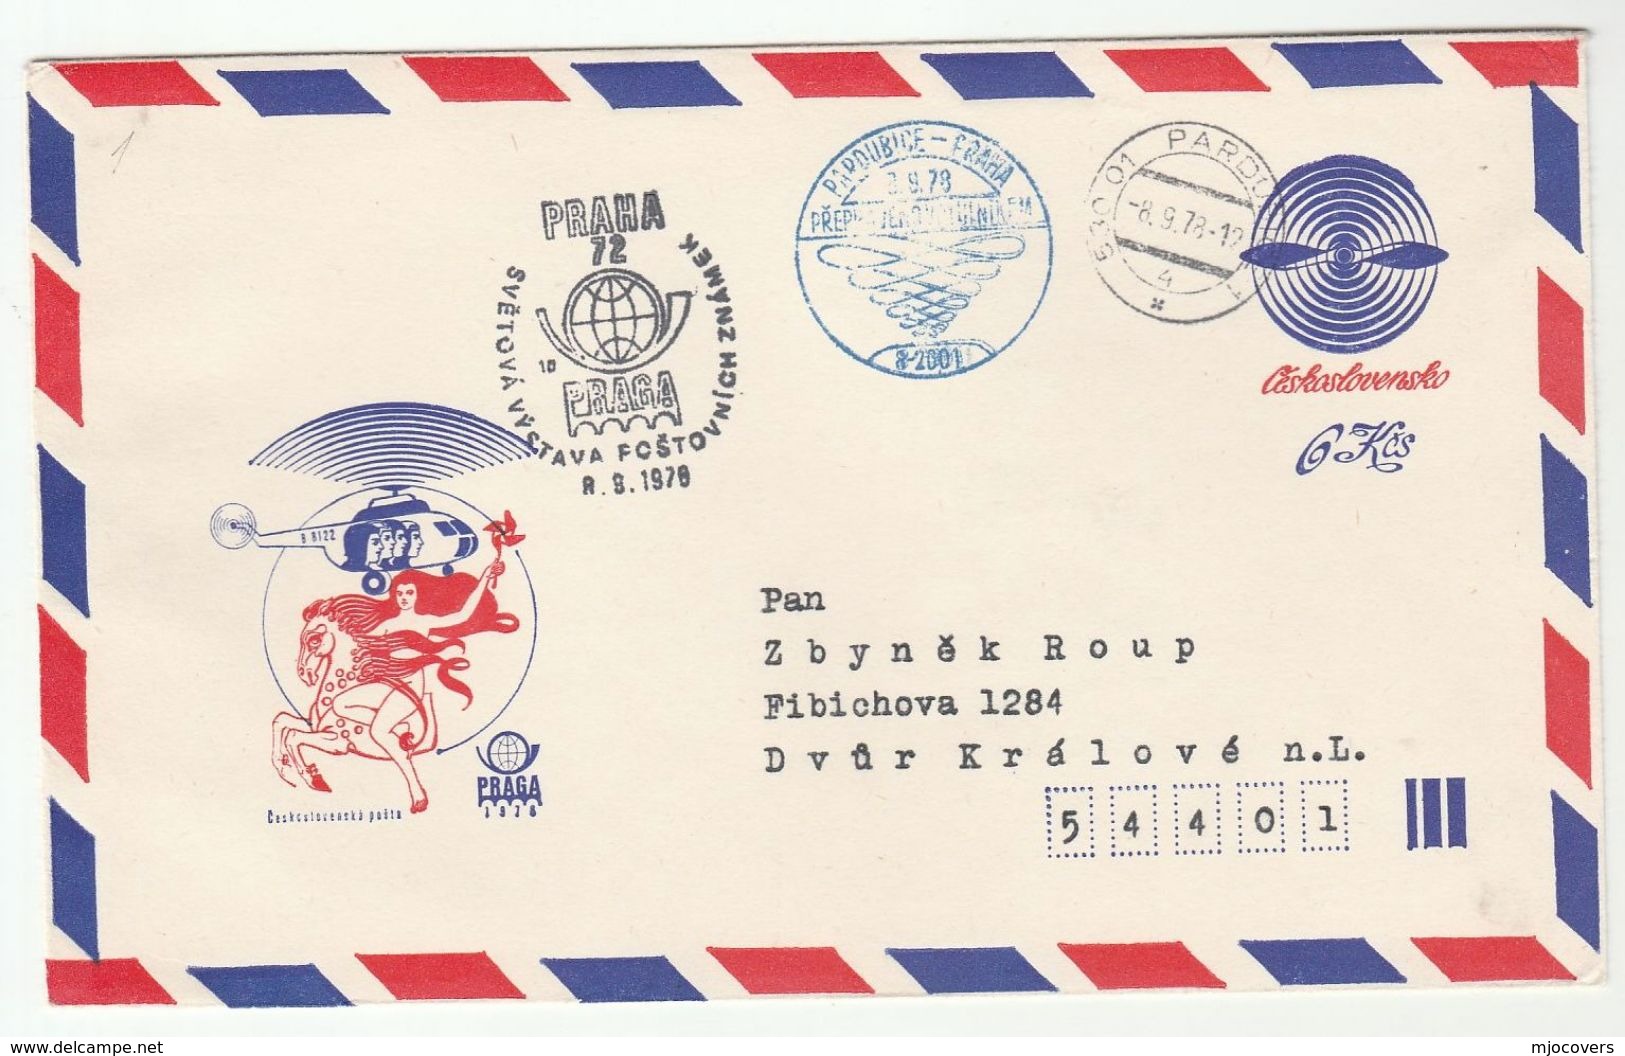 1978 CZECHOSLOVAKIA HELICOPTER FLIGHT COVER B2001 Pardubice  Prag SPECIAL Airmail POSTAL STATIONERY Aviation Stamps - Omslagen